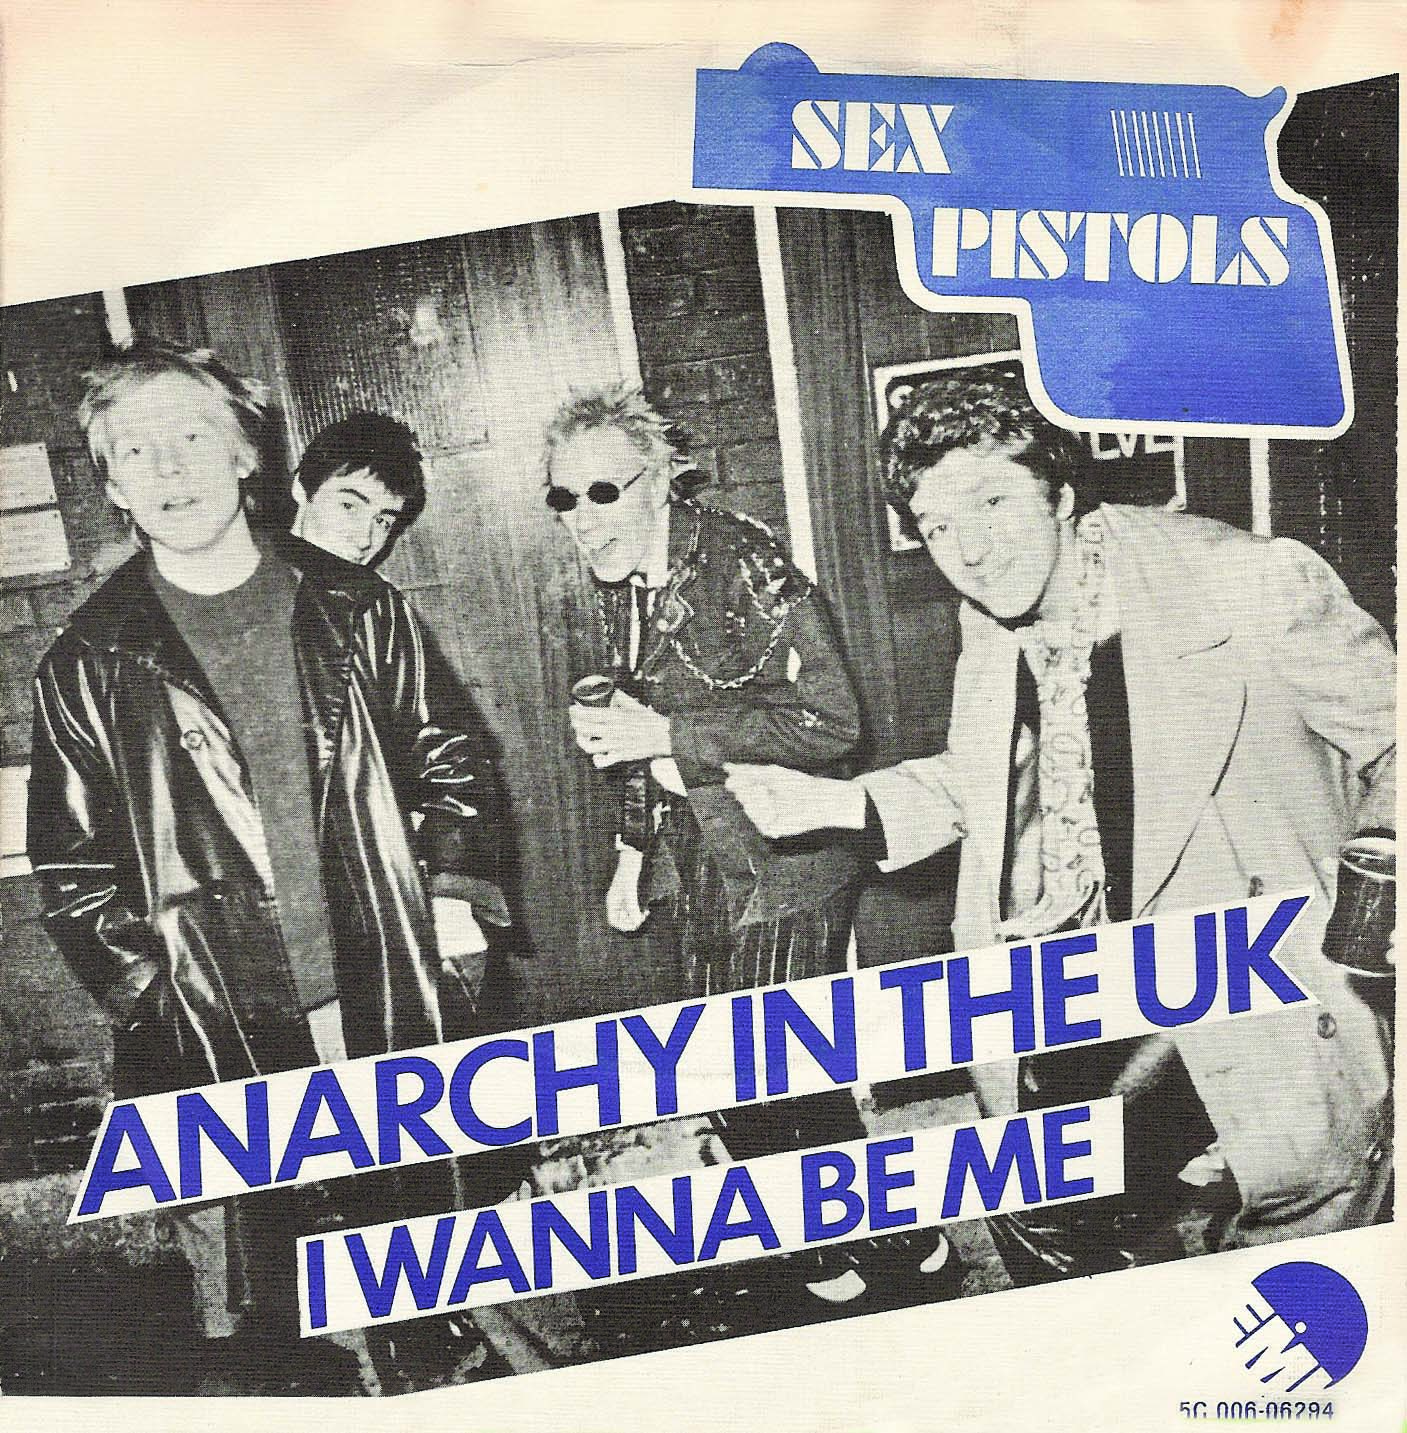 Anarchy in the UK - Holland  1976